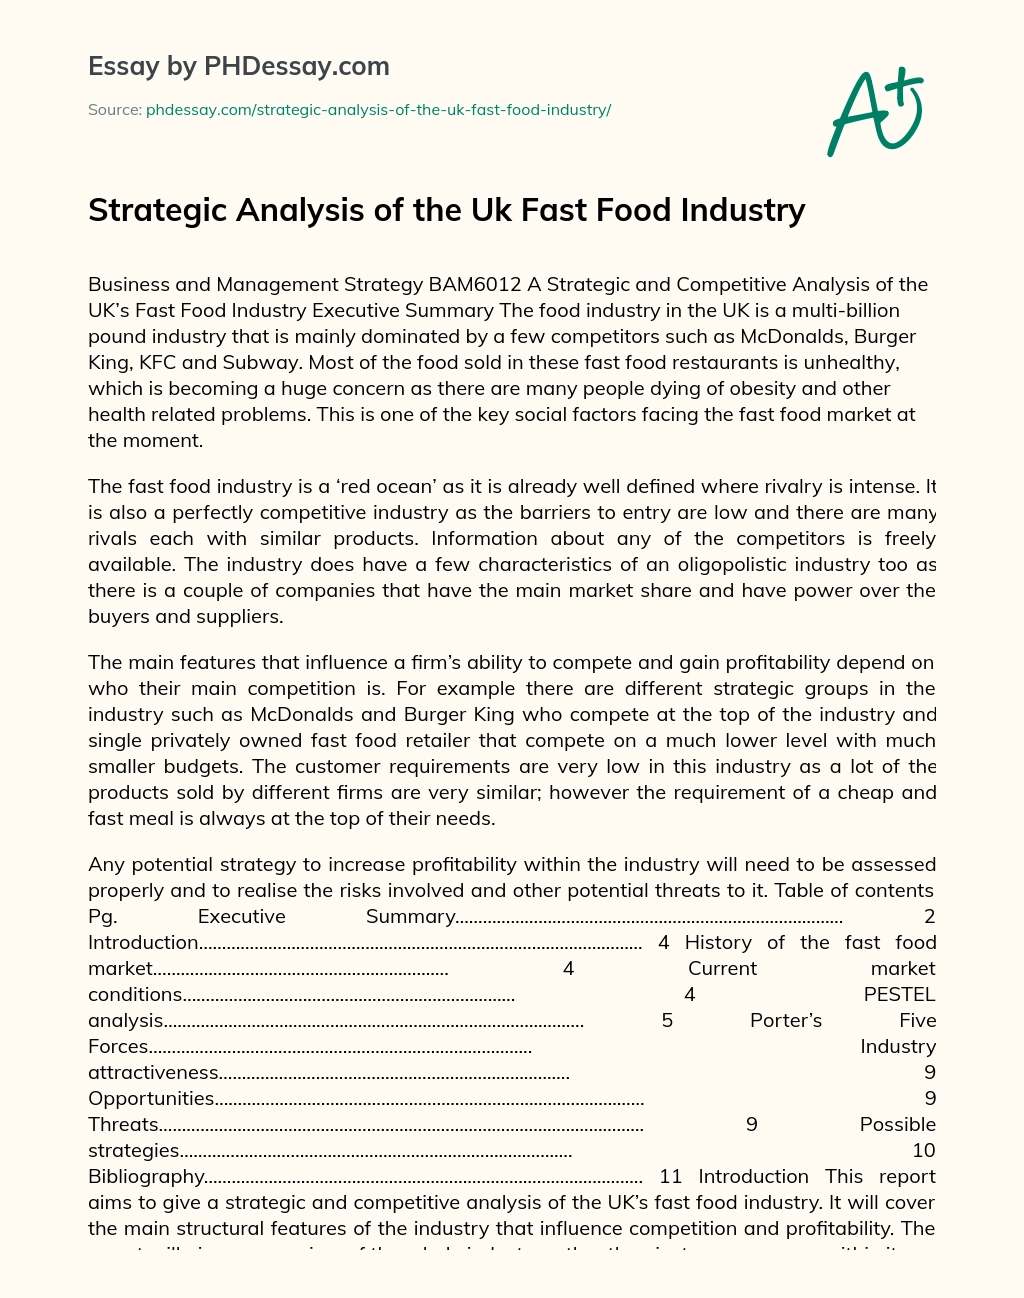 Strategic Analysis of the Uk Fast Food Industry essay